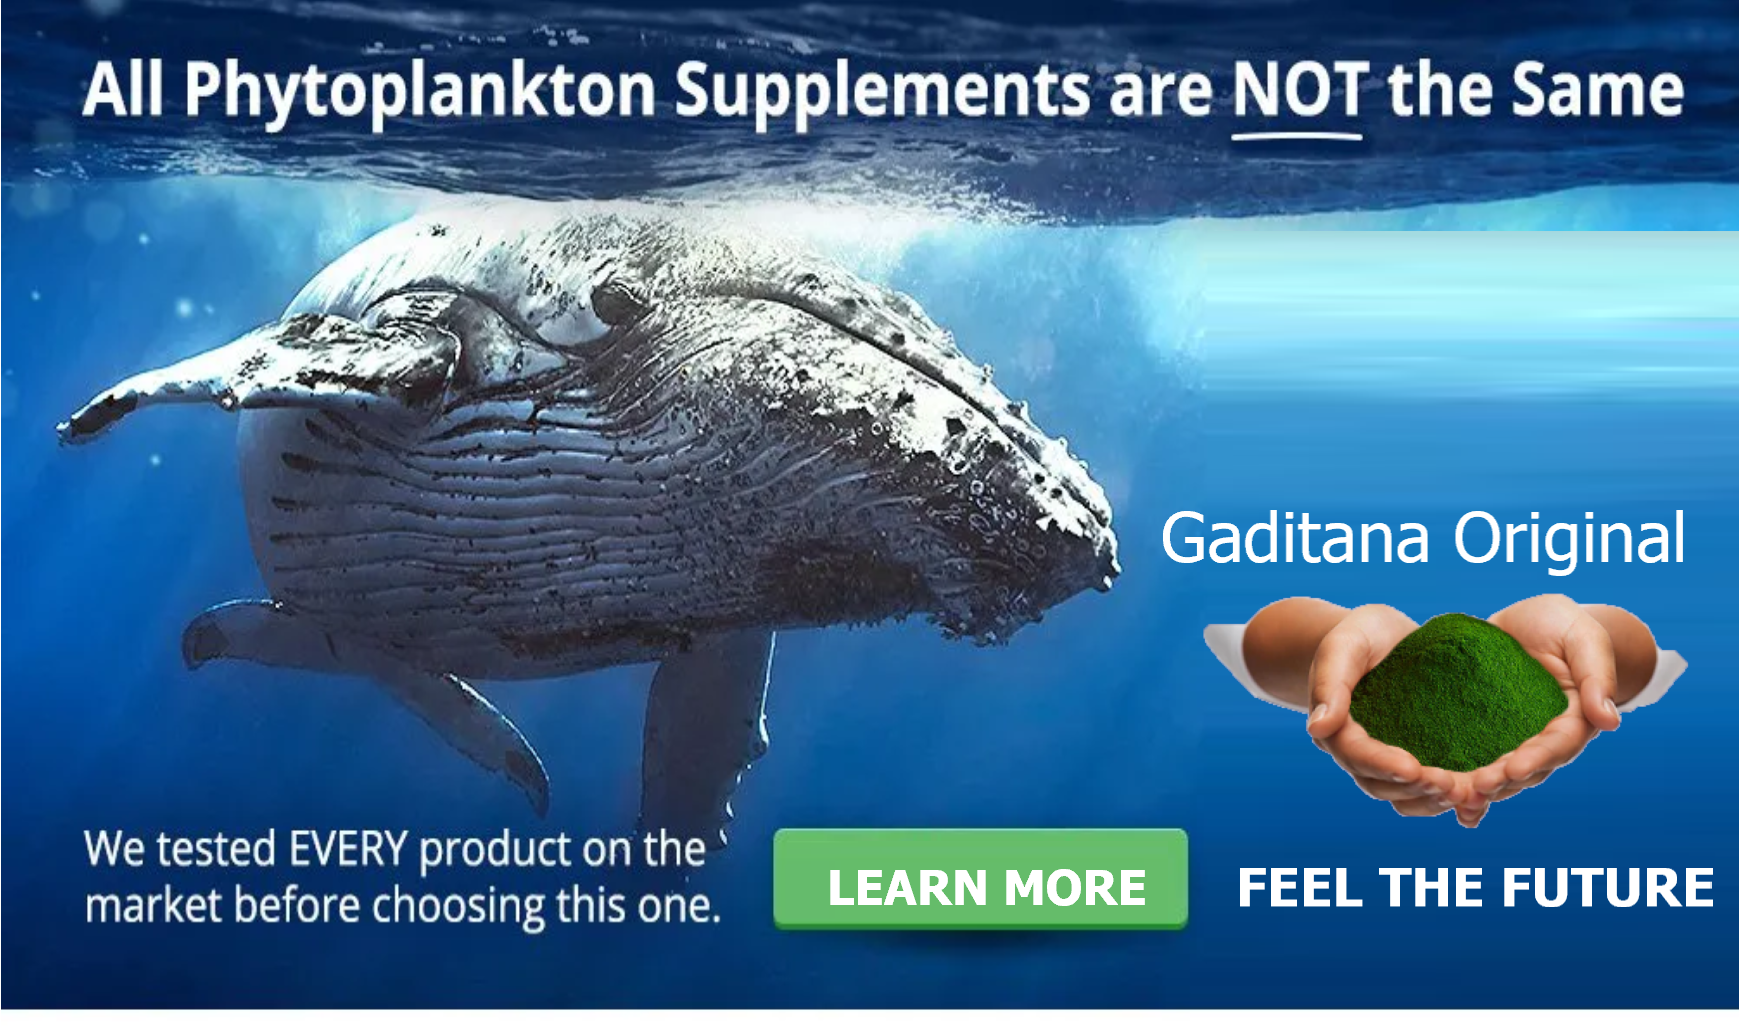 All Phytoplankton Supplements Are Not Created Equally - See Why Caditiana Original Is The Best